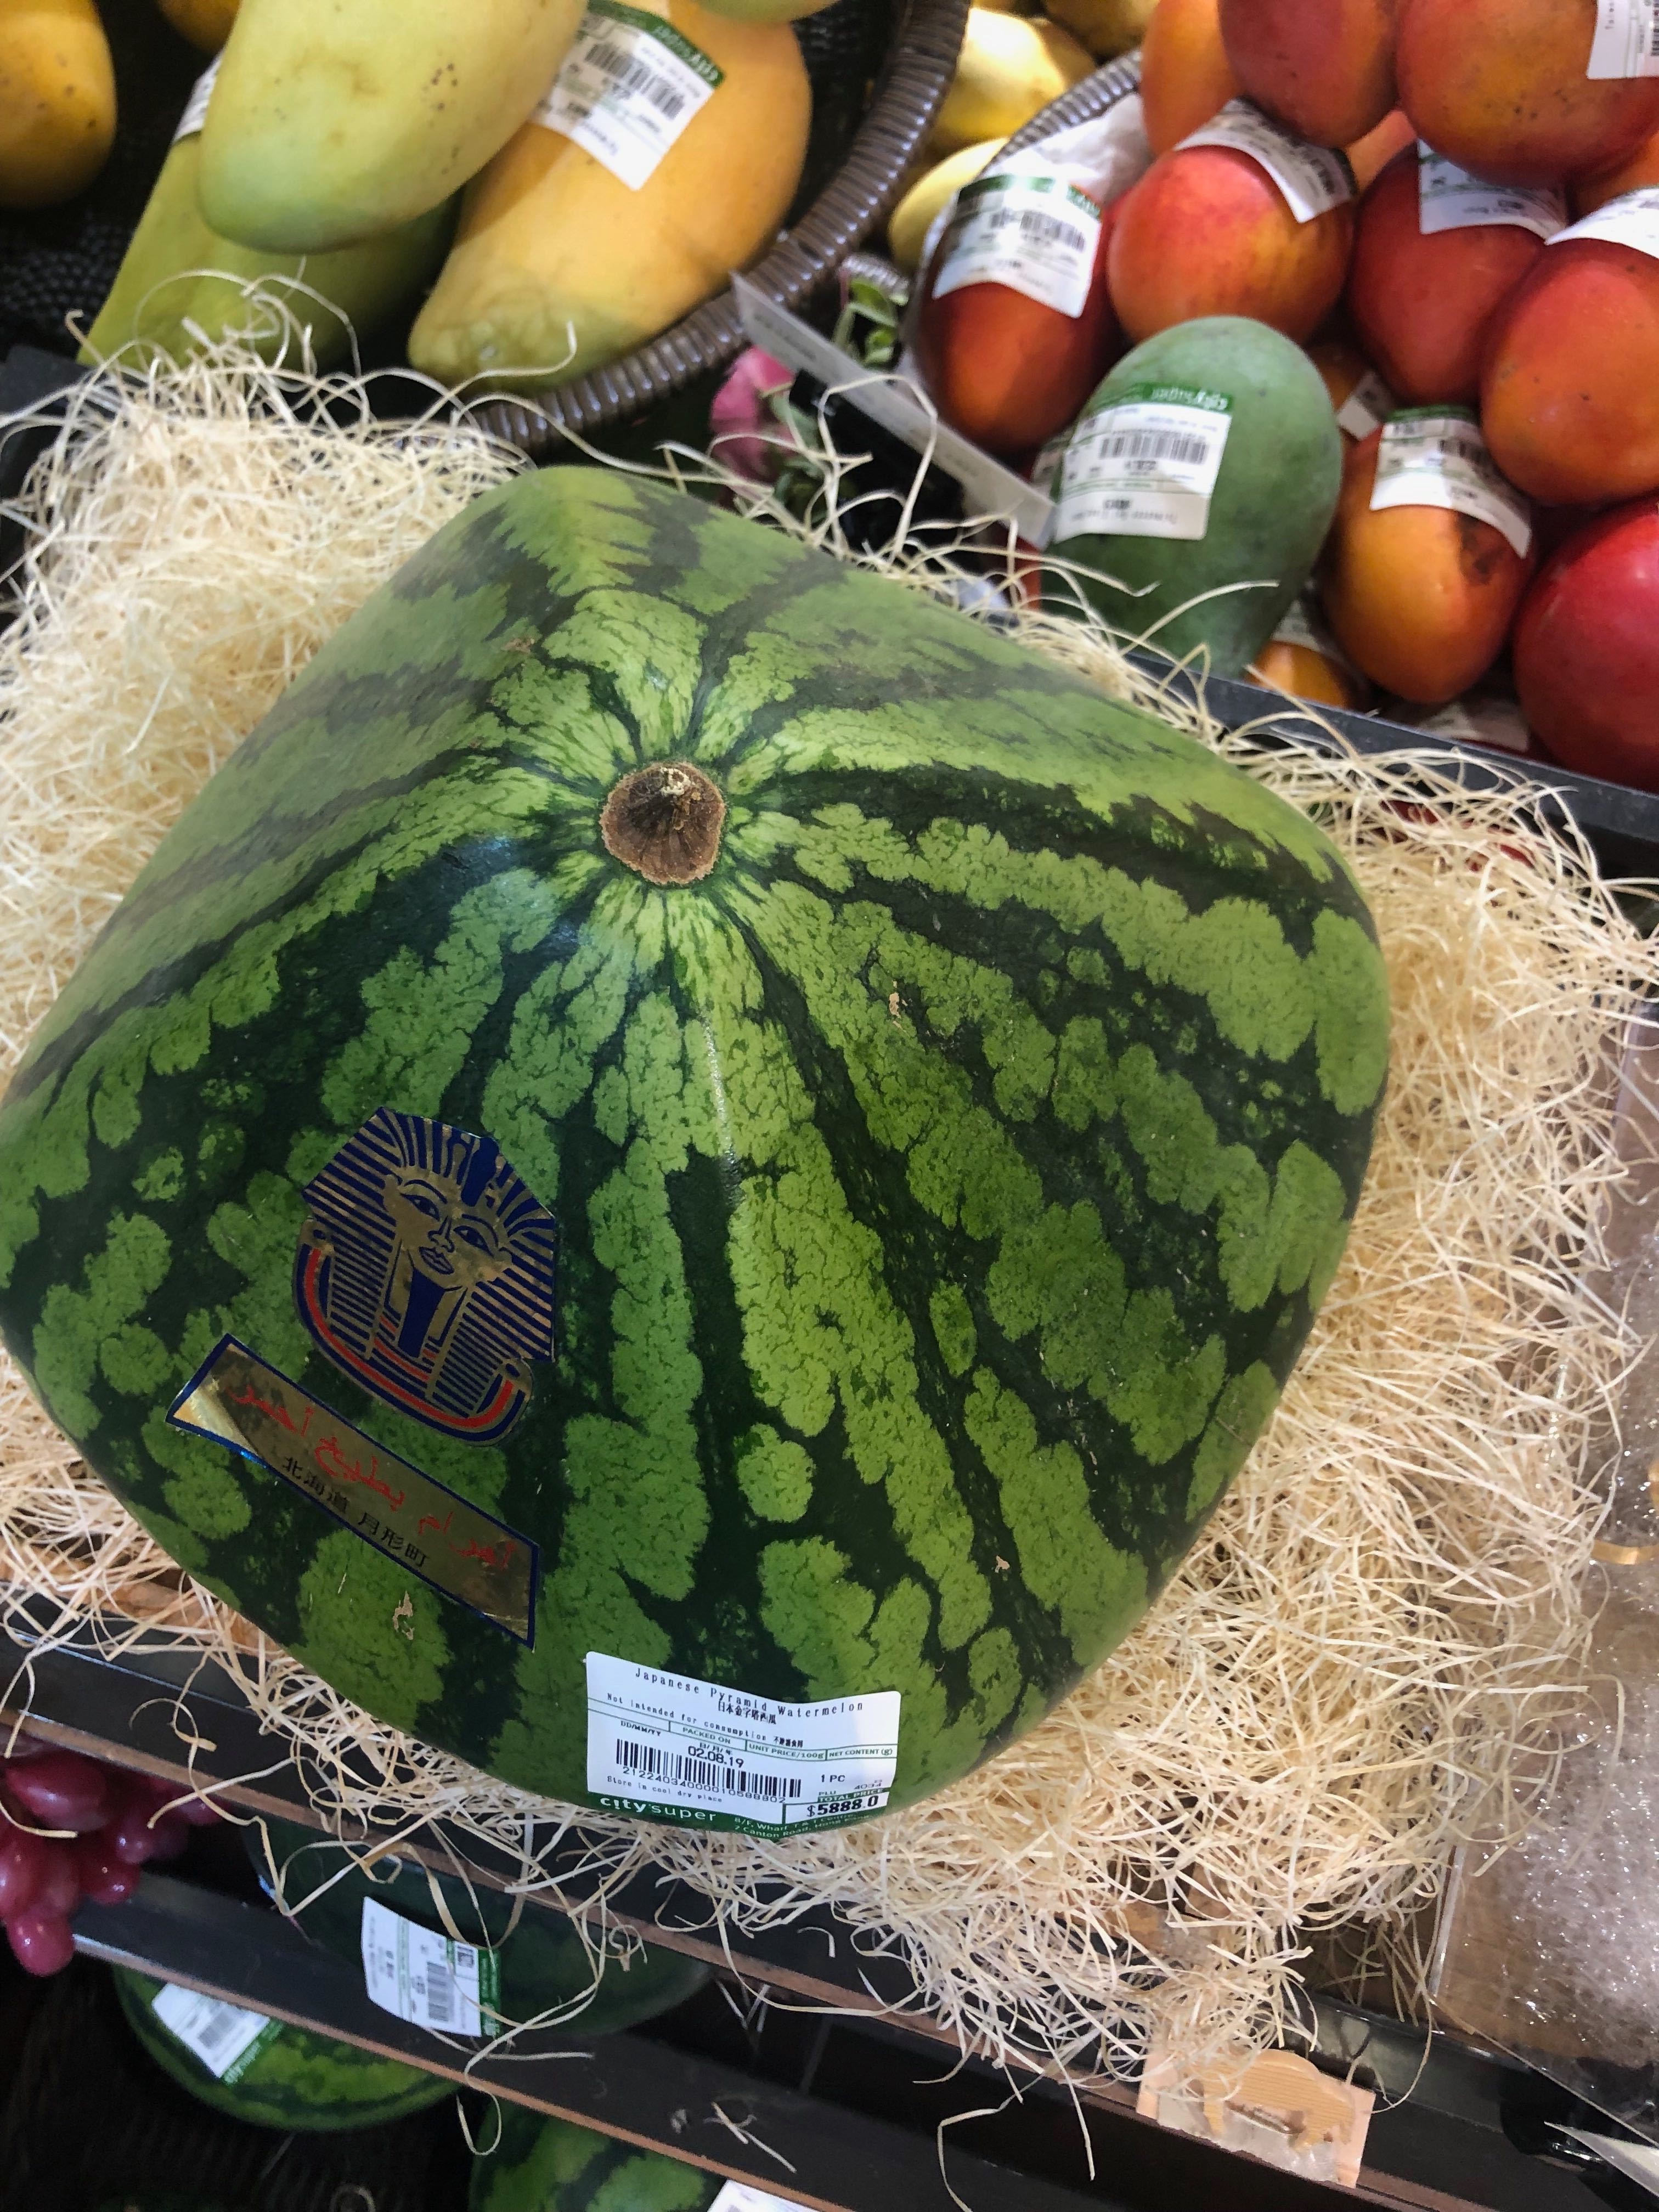 City'super’s watermelons come in all sorts of weird and wonderful shapes and sizes.